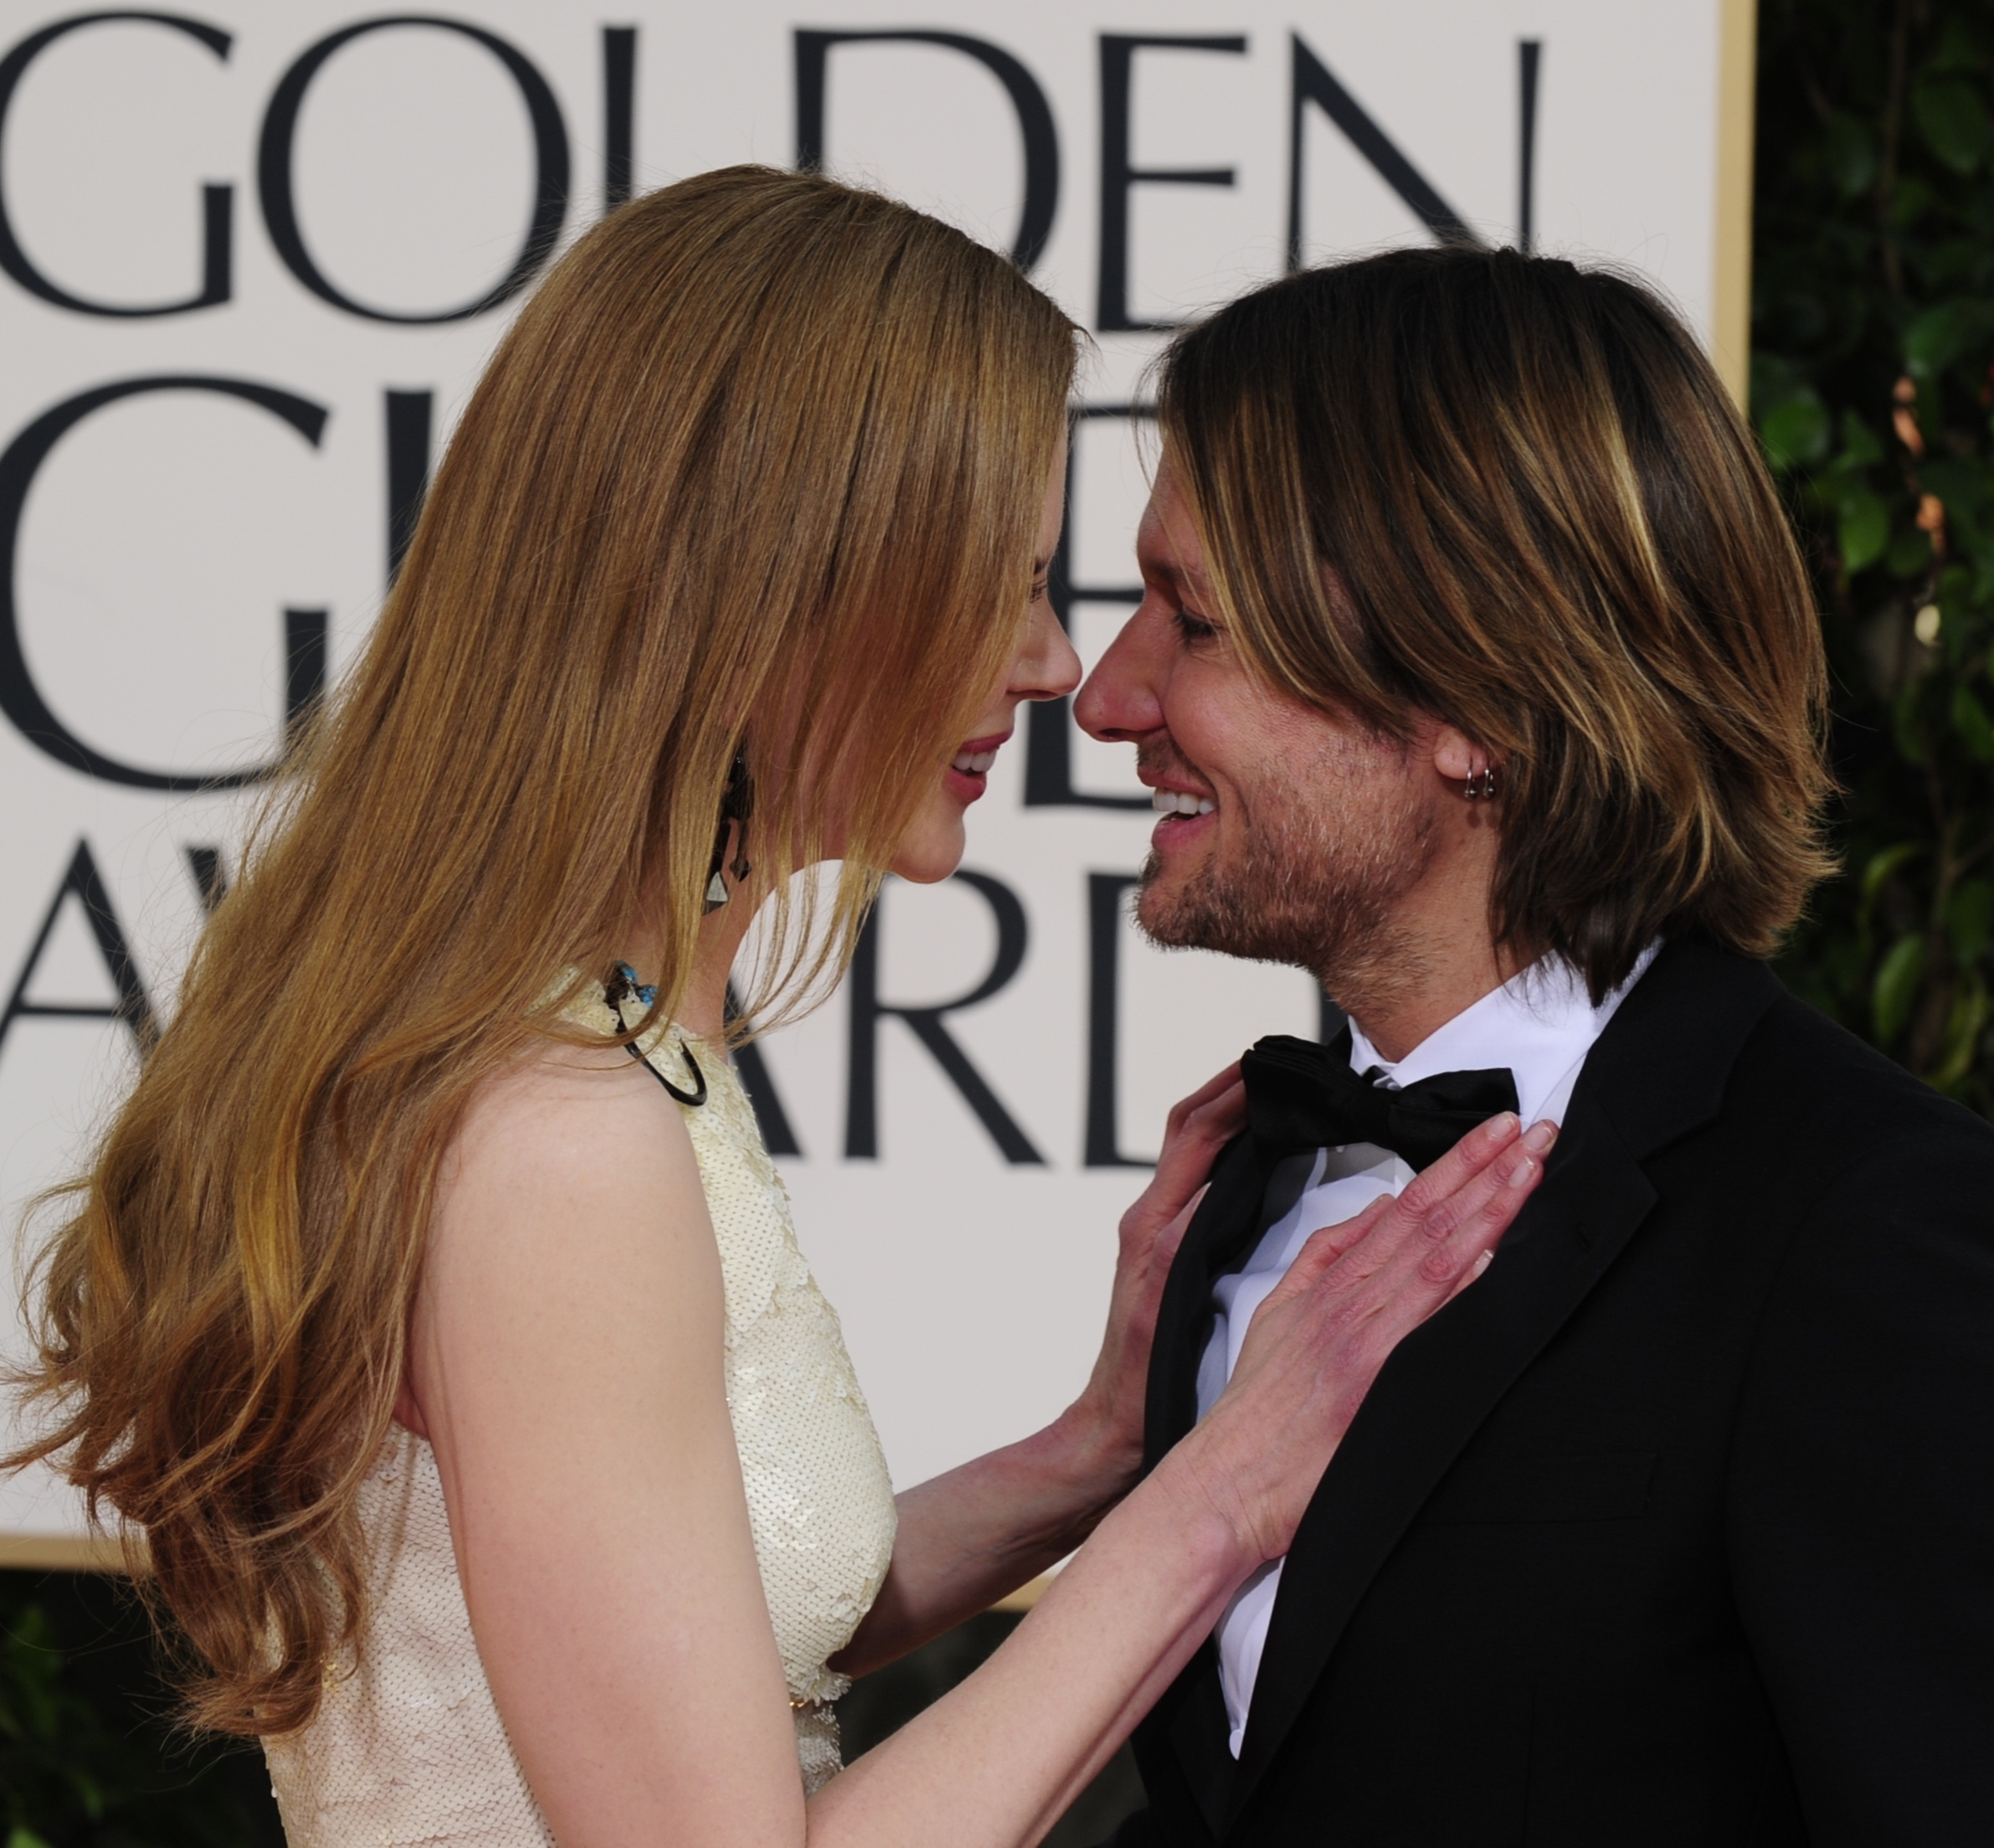 Nicole Kidman and Keith Urban at the 68th annual Golden Globe Awards in Beverly Hills, California, on January 16, 2011. | Source: Getty Images